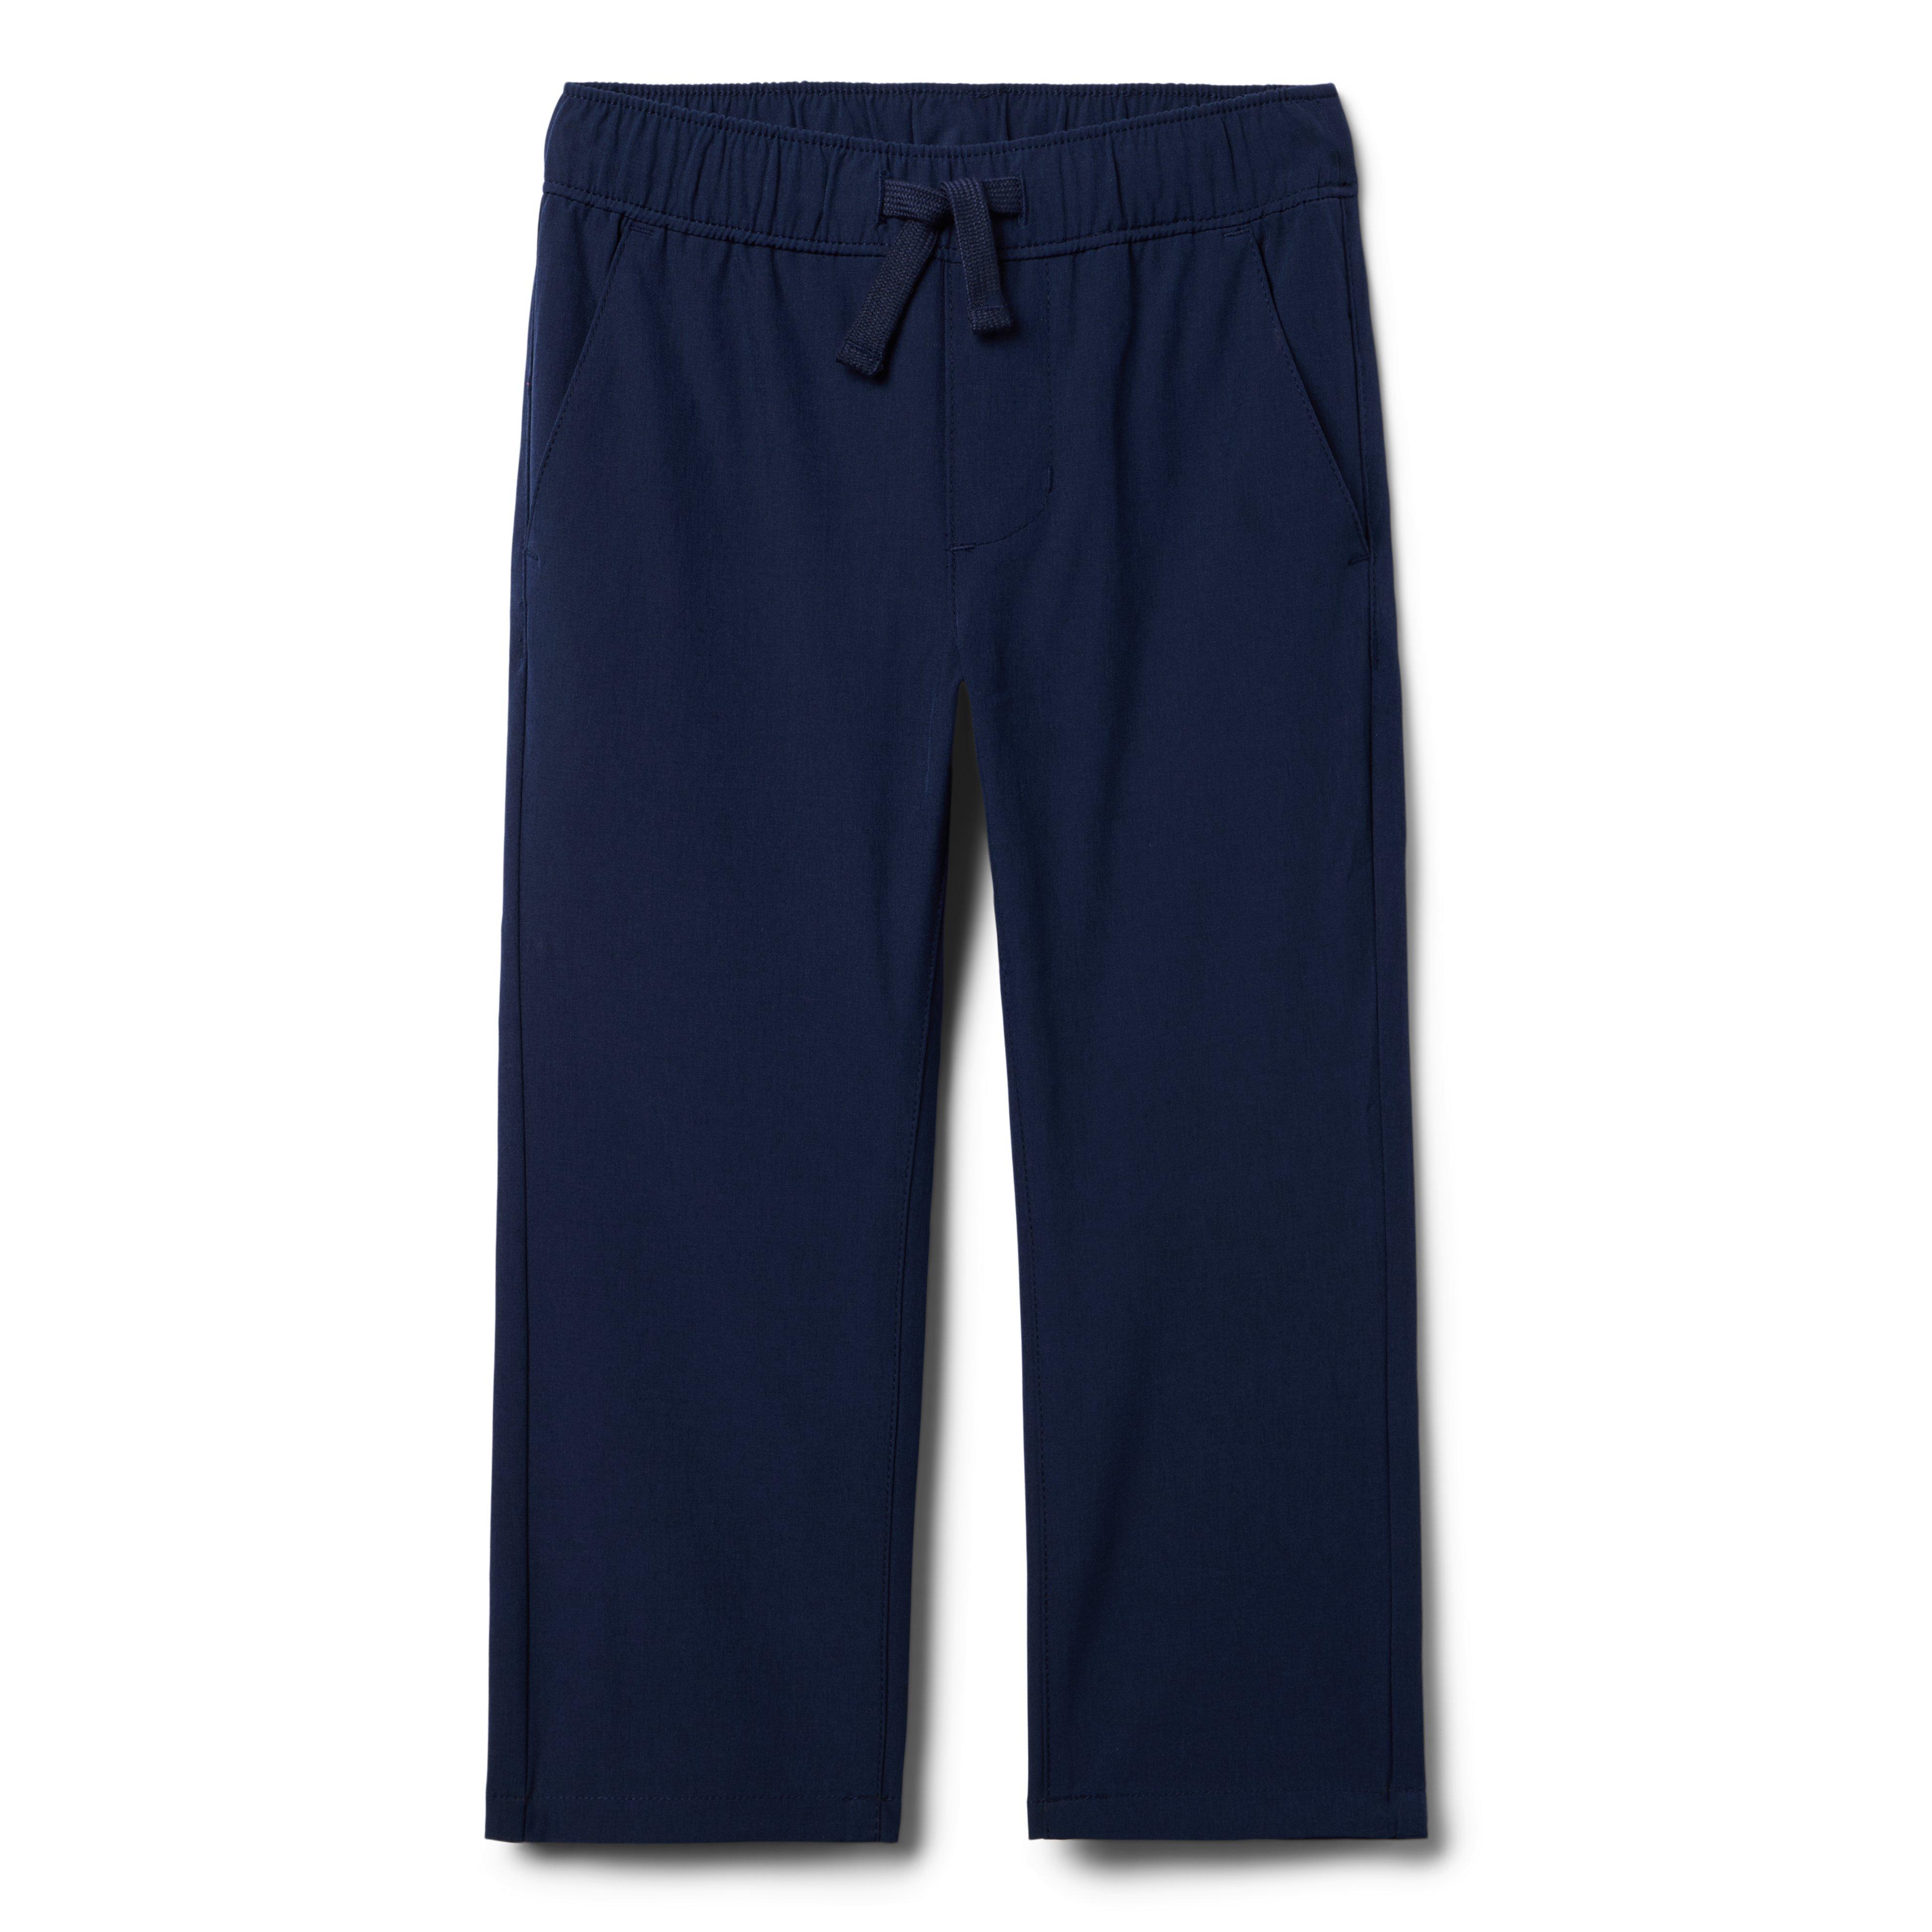 The Everywhere Quick Dry Pant